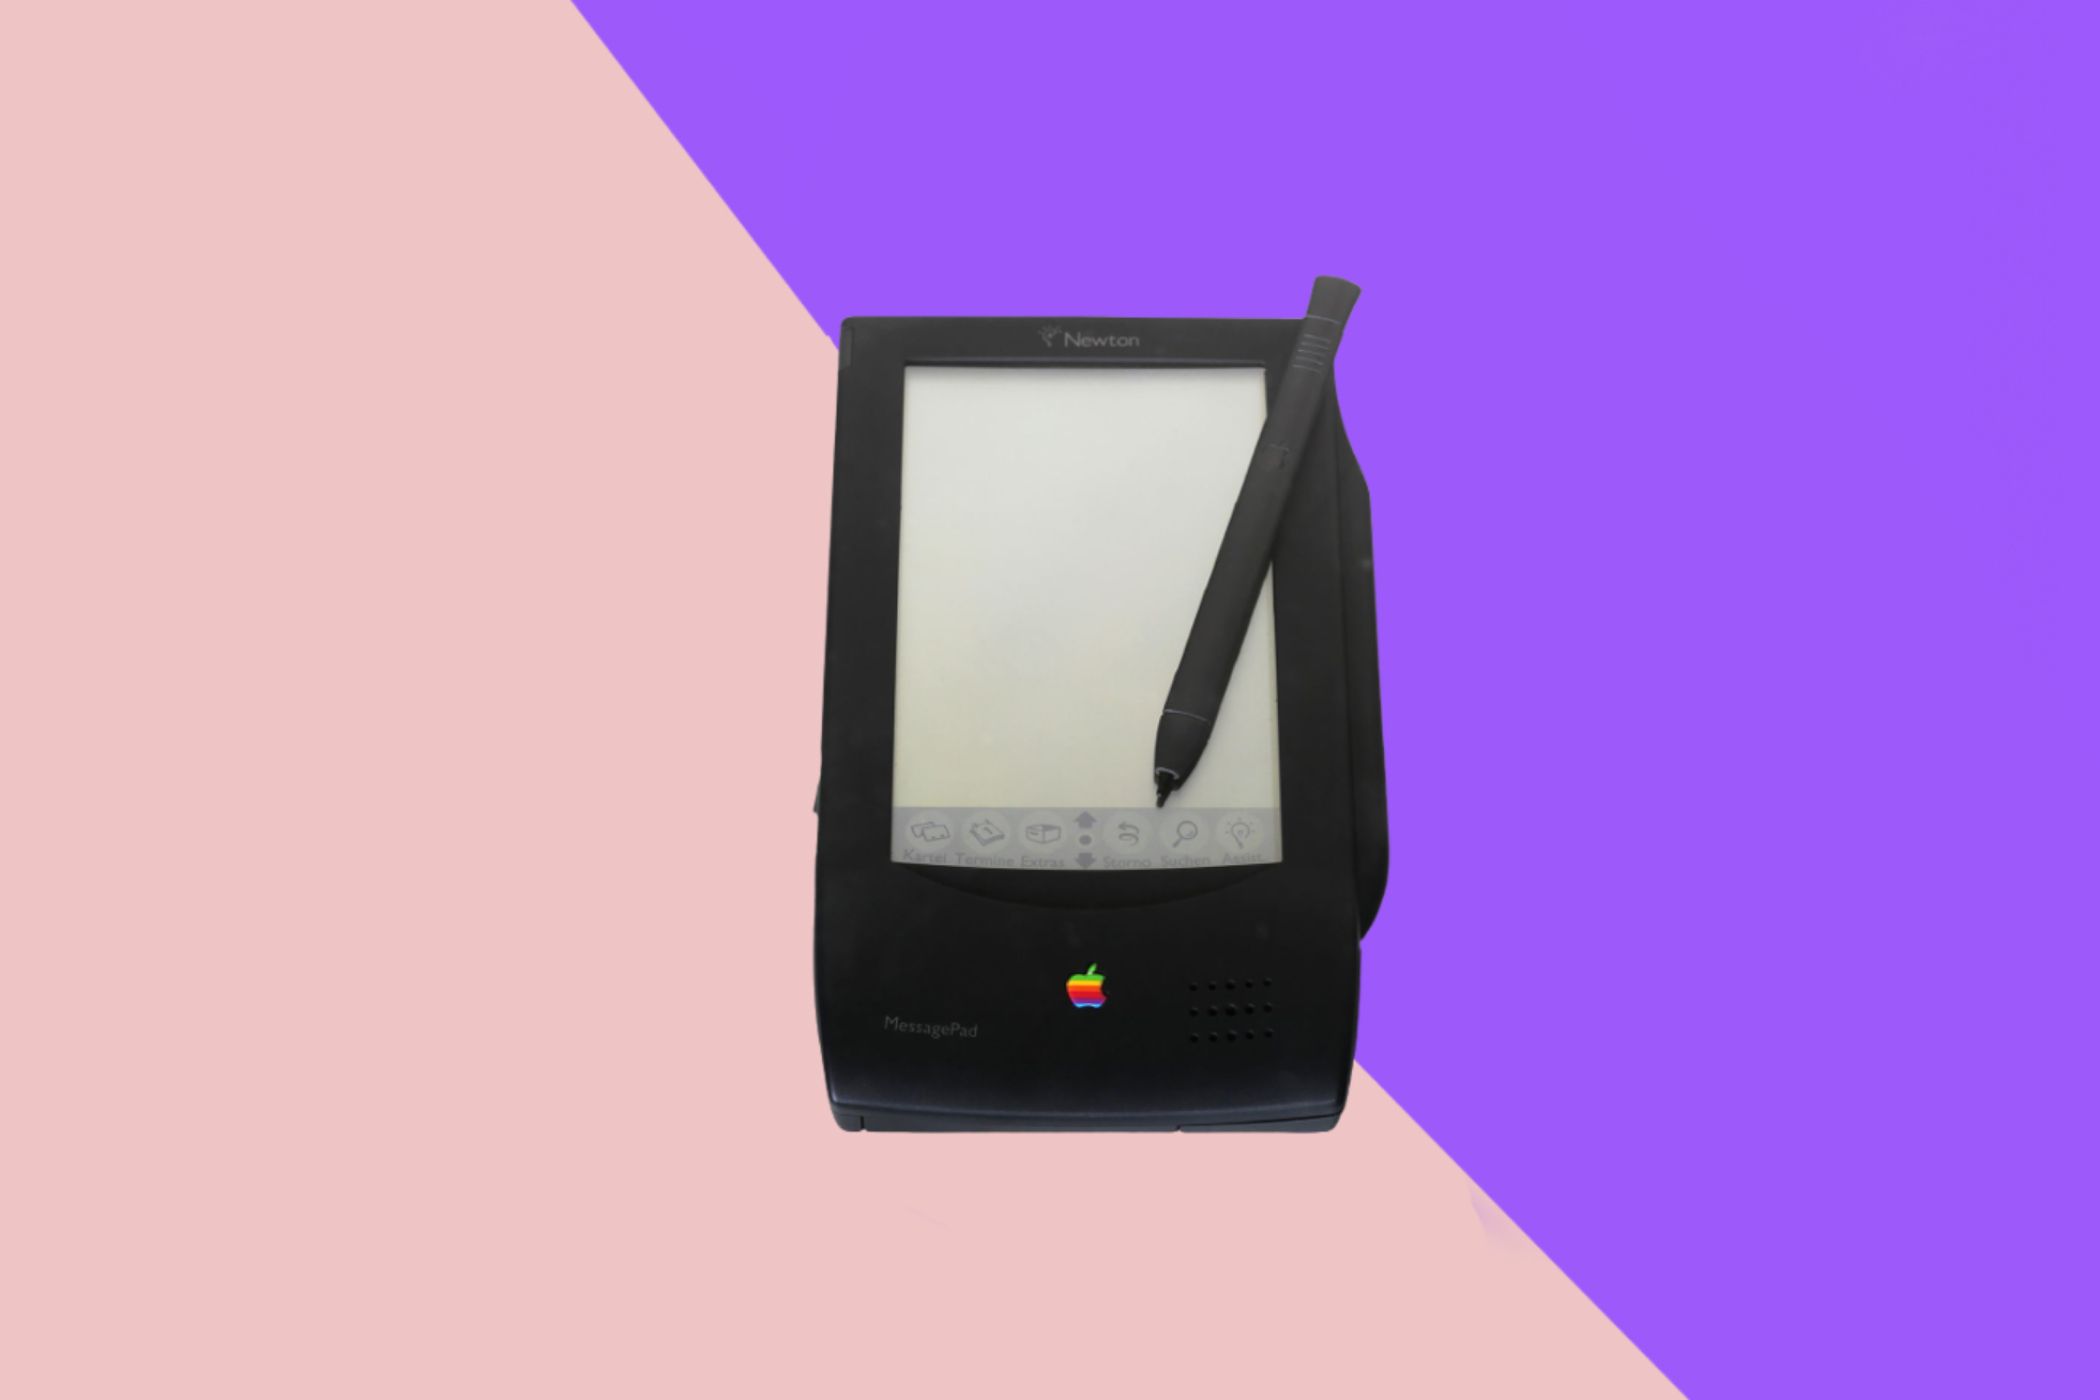 An image of the Apple MessagePad